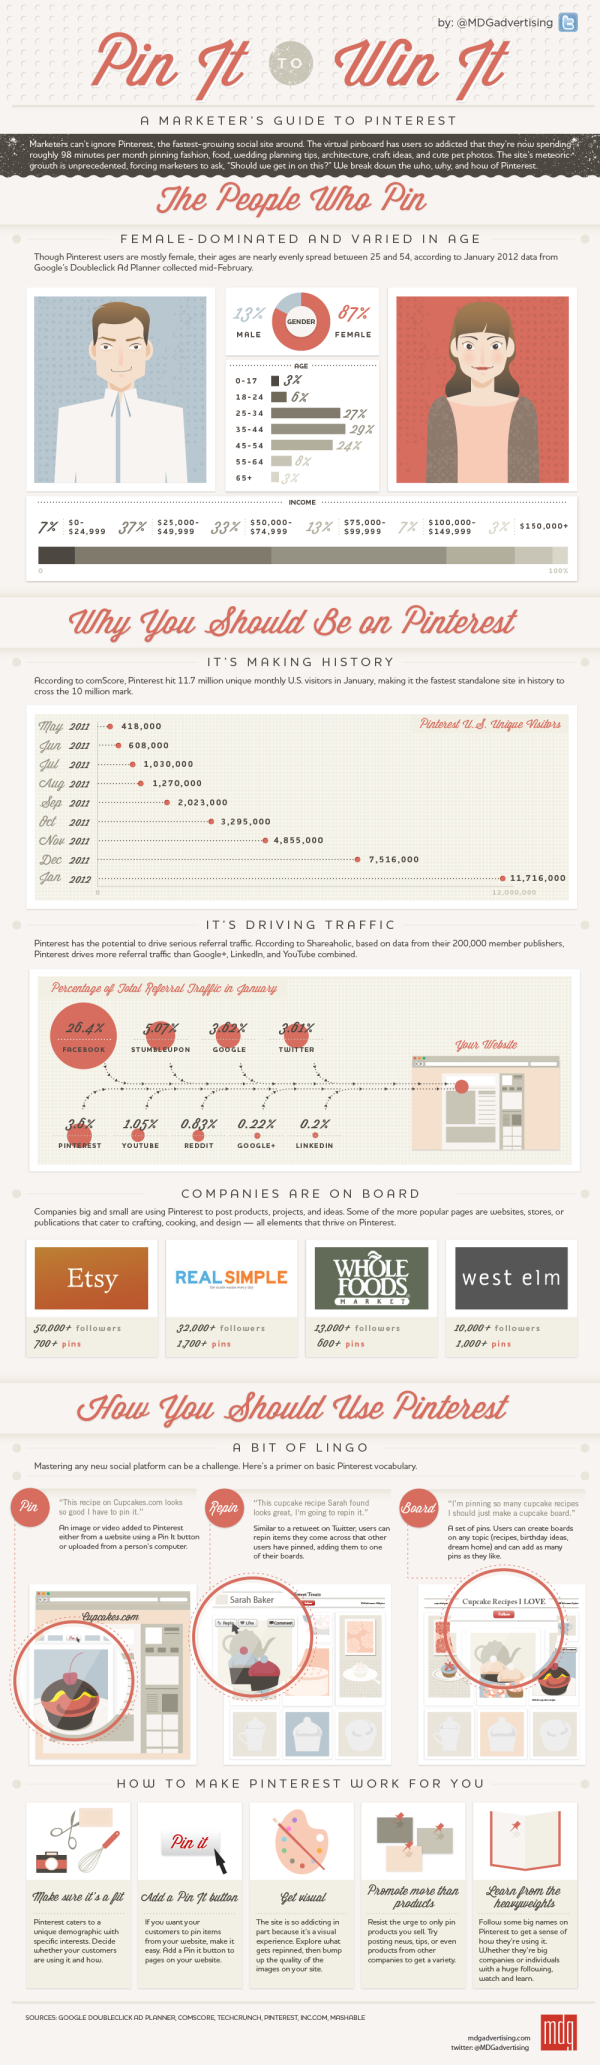 infographic marketers guide to pinterest resized 600